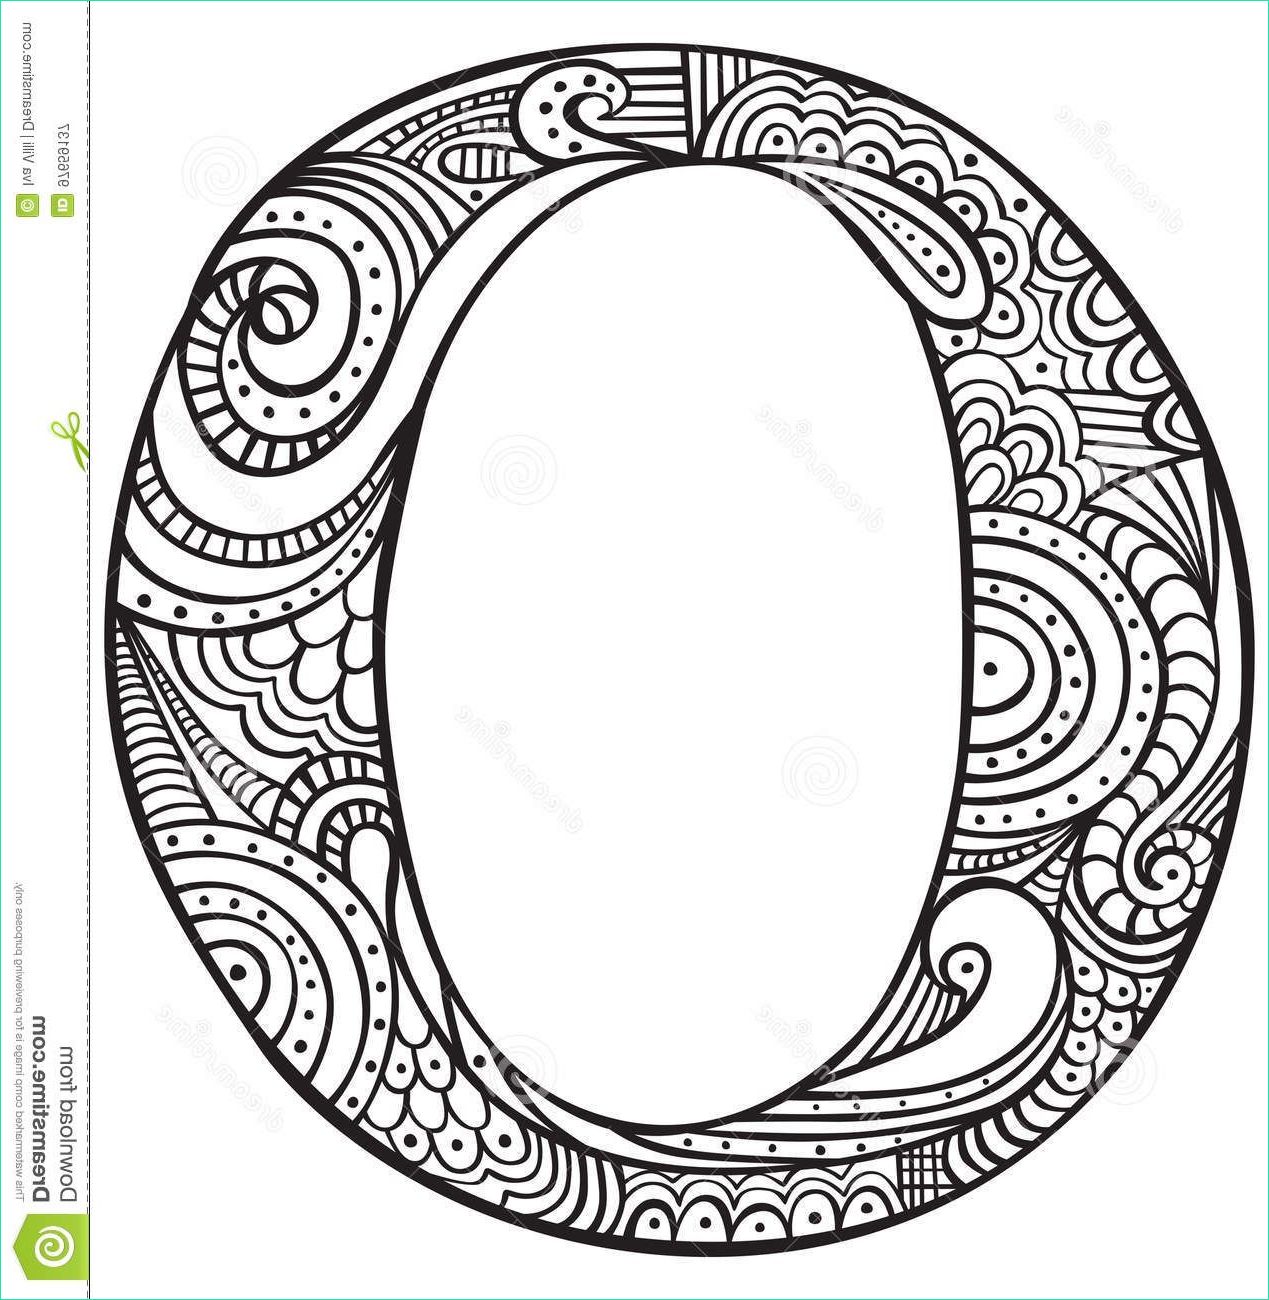 Lettre Mandala Beau Photographie Illustration About Hand Drawn Capital Letter O In Black